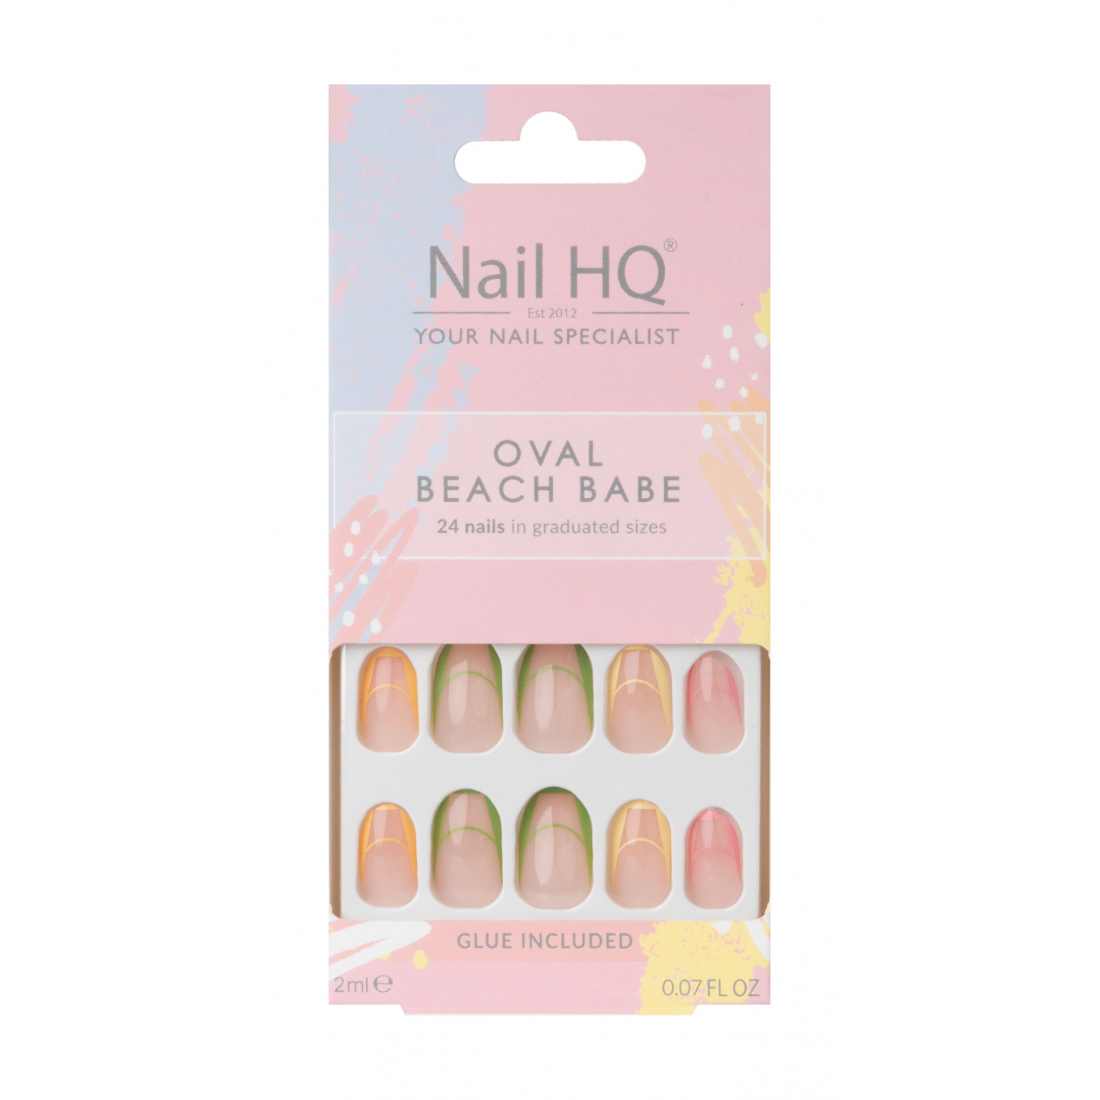 'Oval Beach Babe' Fake Nails -24 Pieces